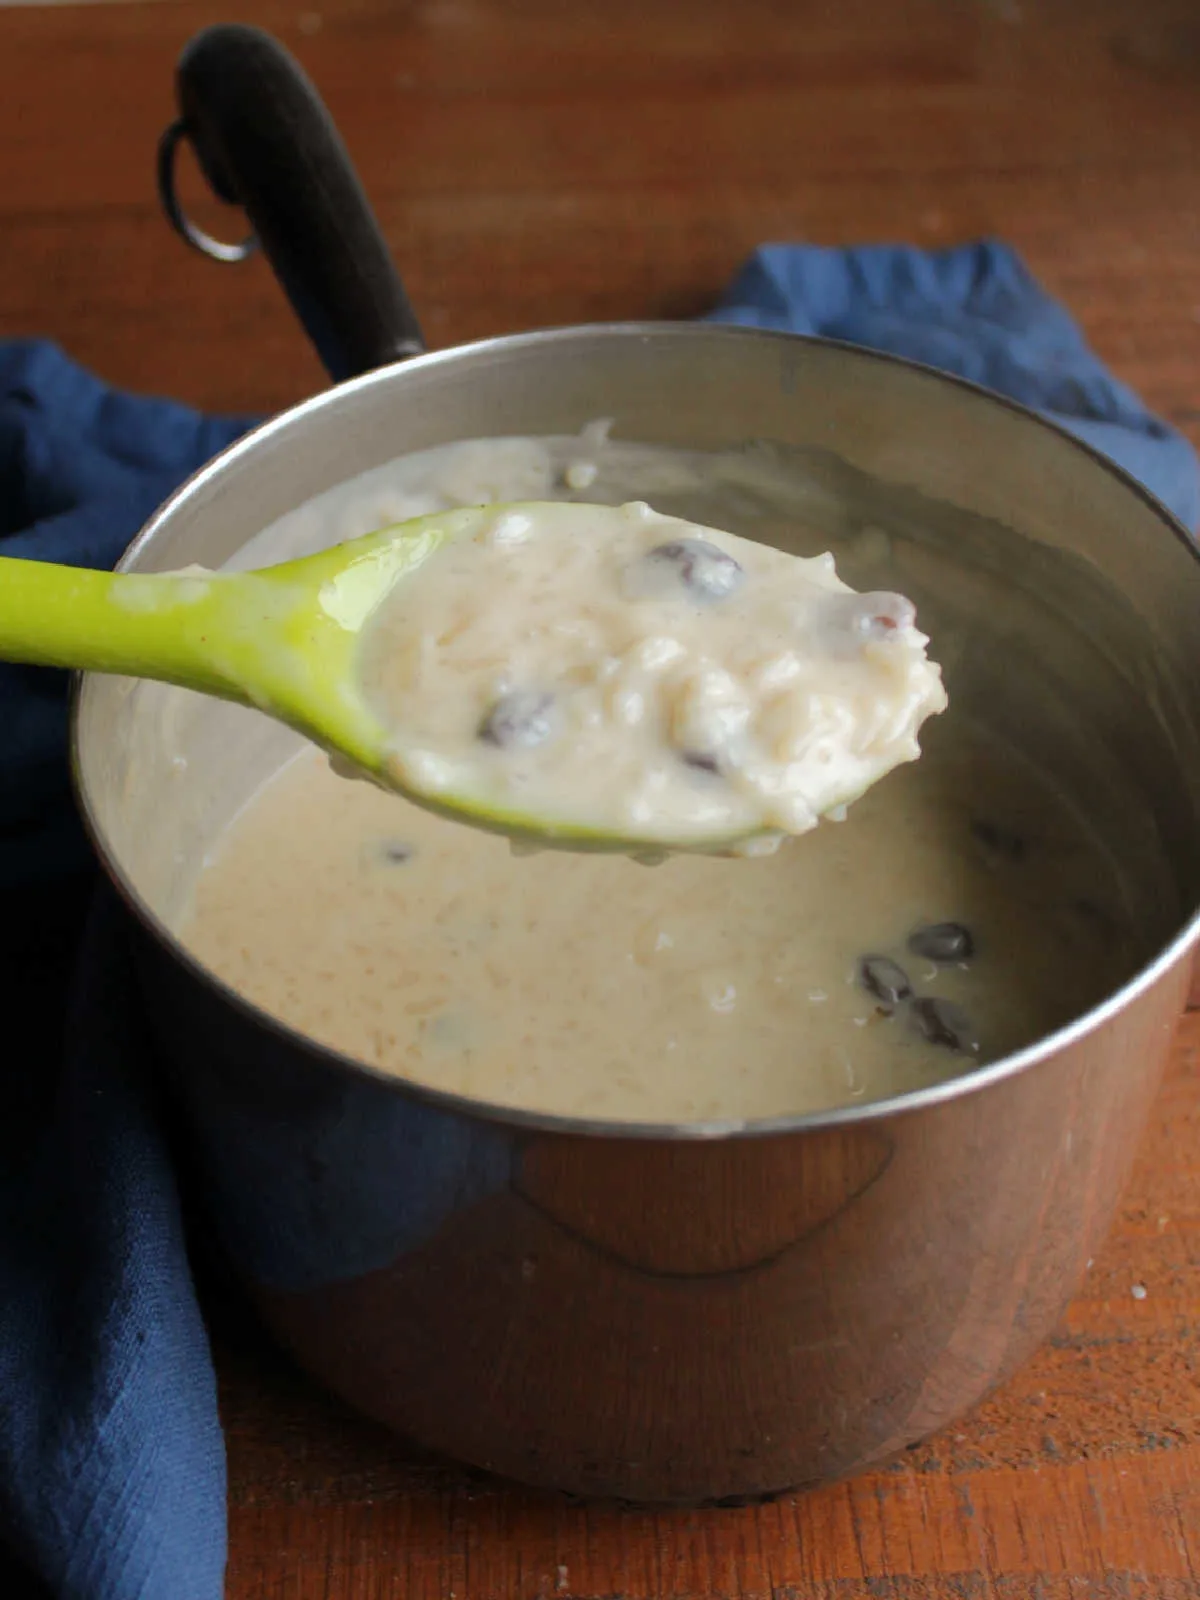 Serving spoon of cooked condensed milk rice pudding mixture showing how it is still loose when it is hot.